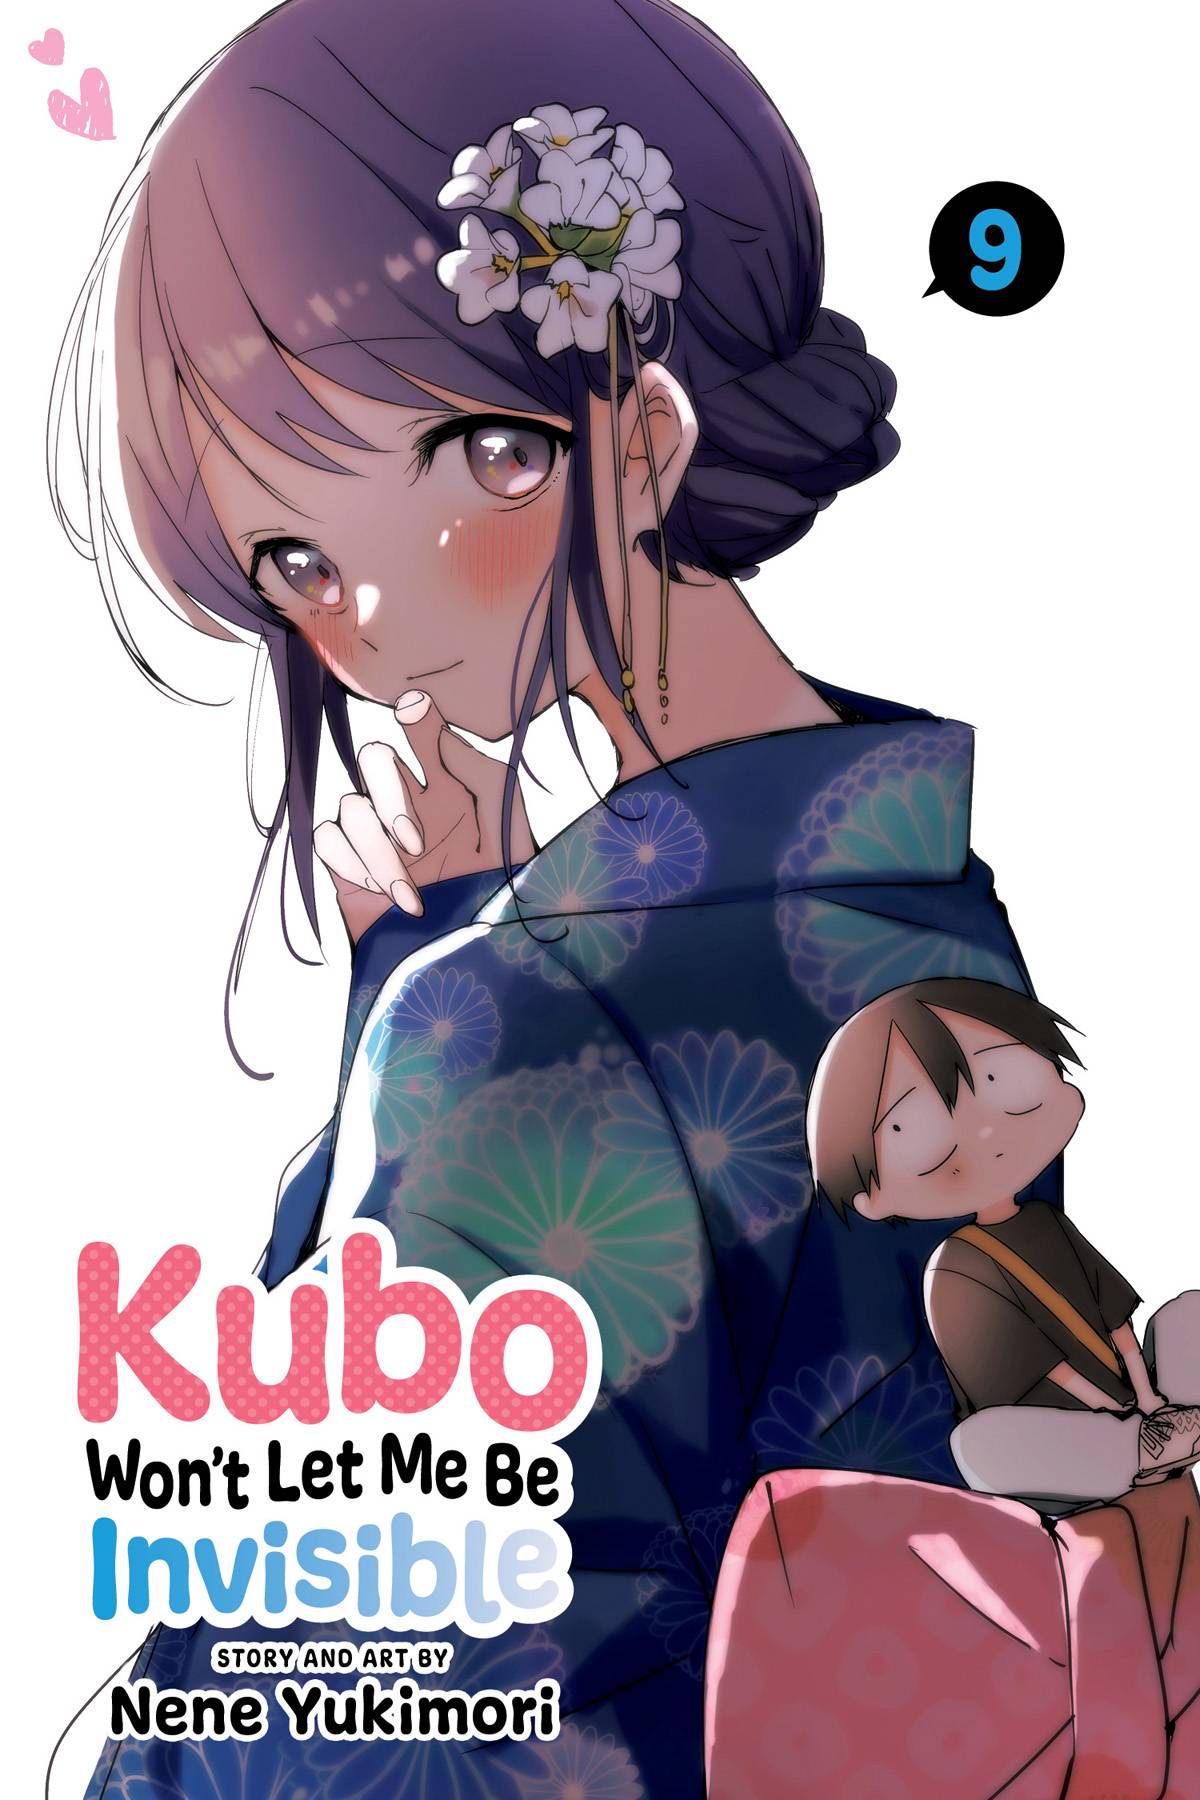 Kubo Wont Let Me Be Invisible GN Vol 09 (MR)